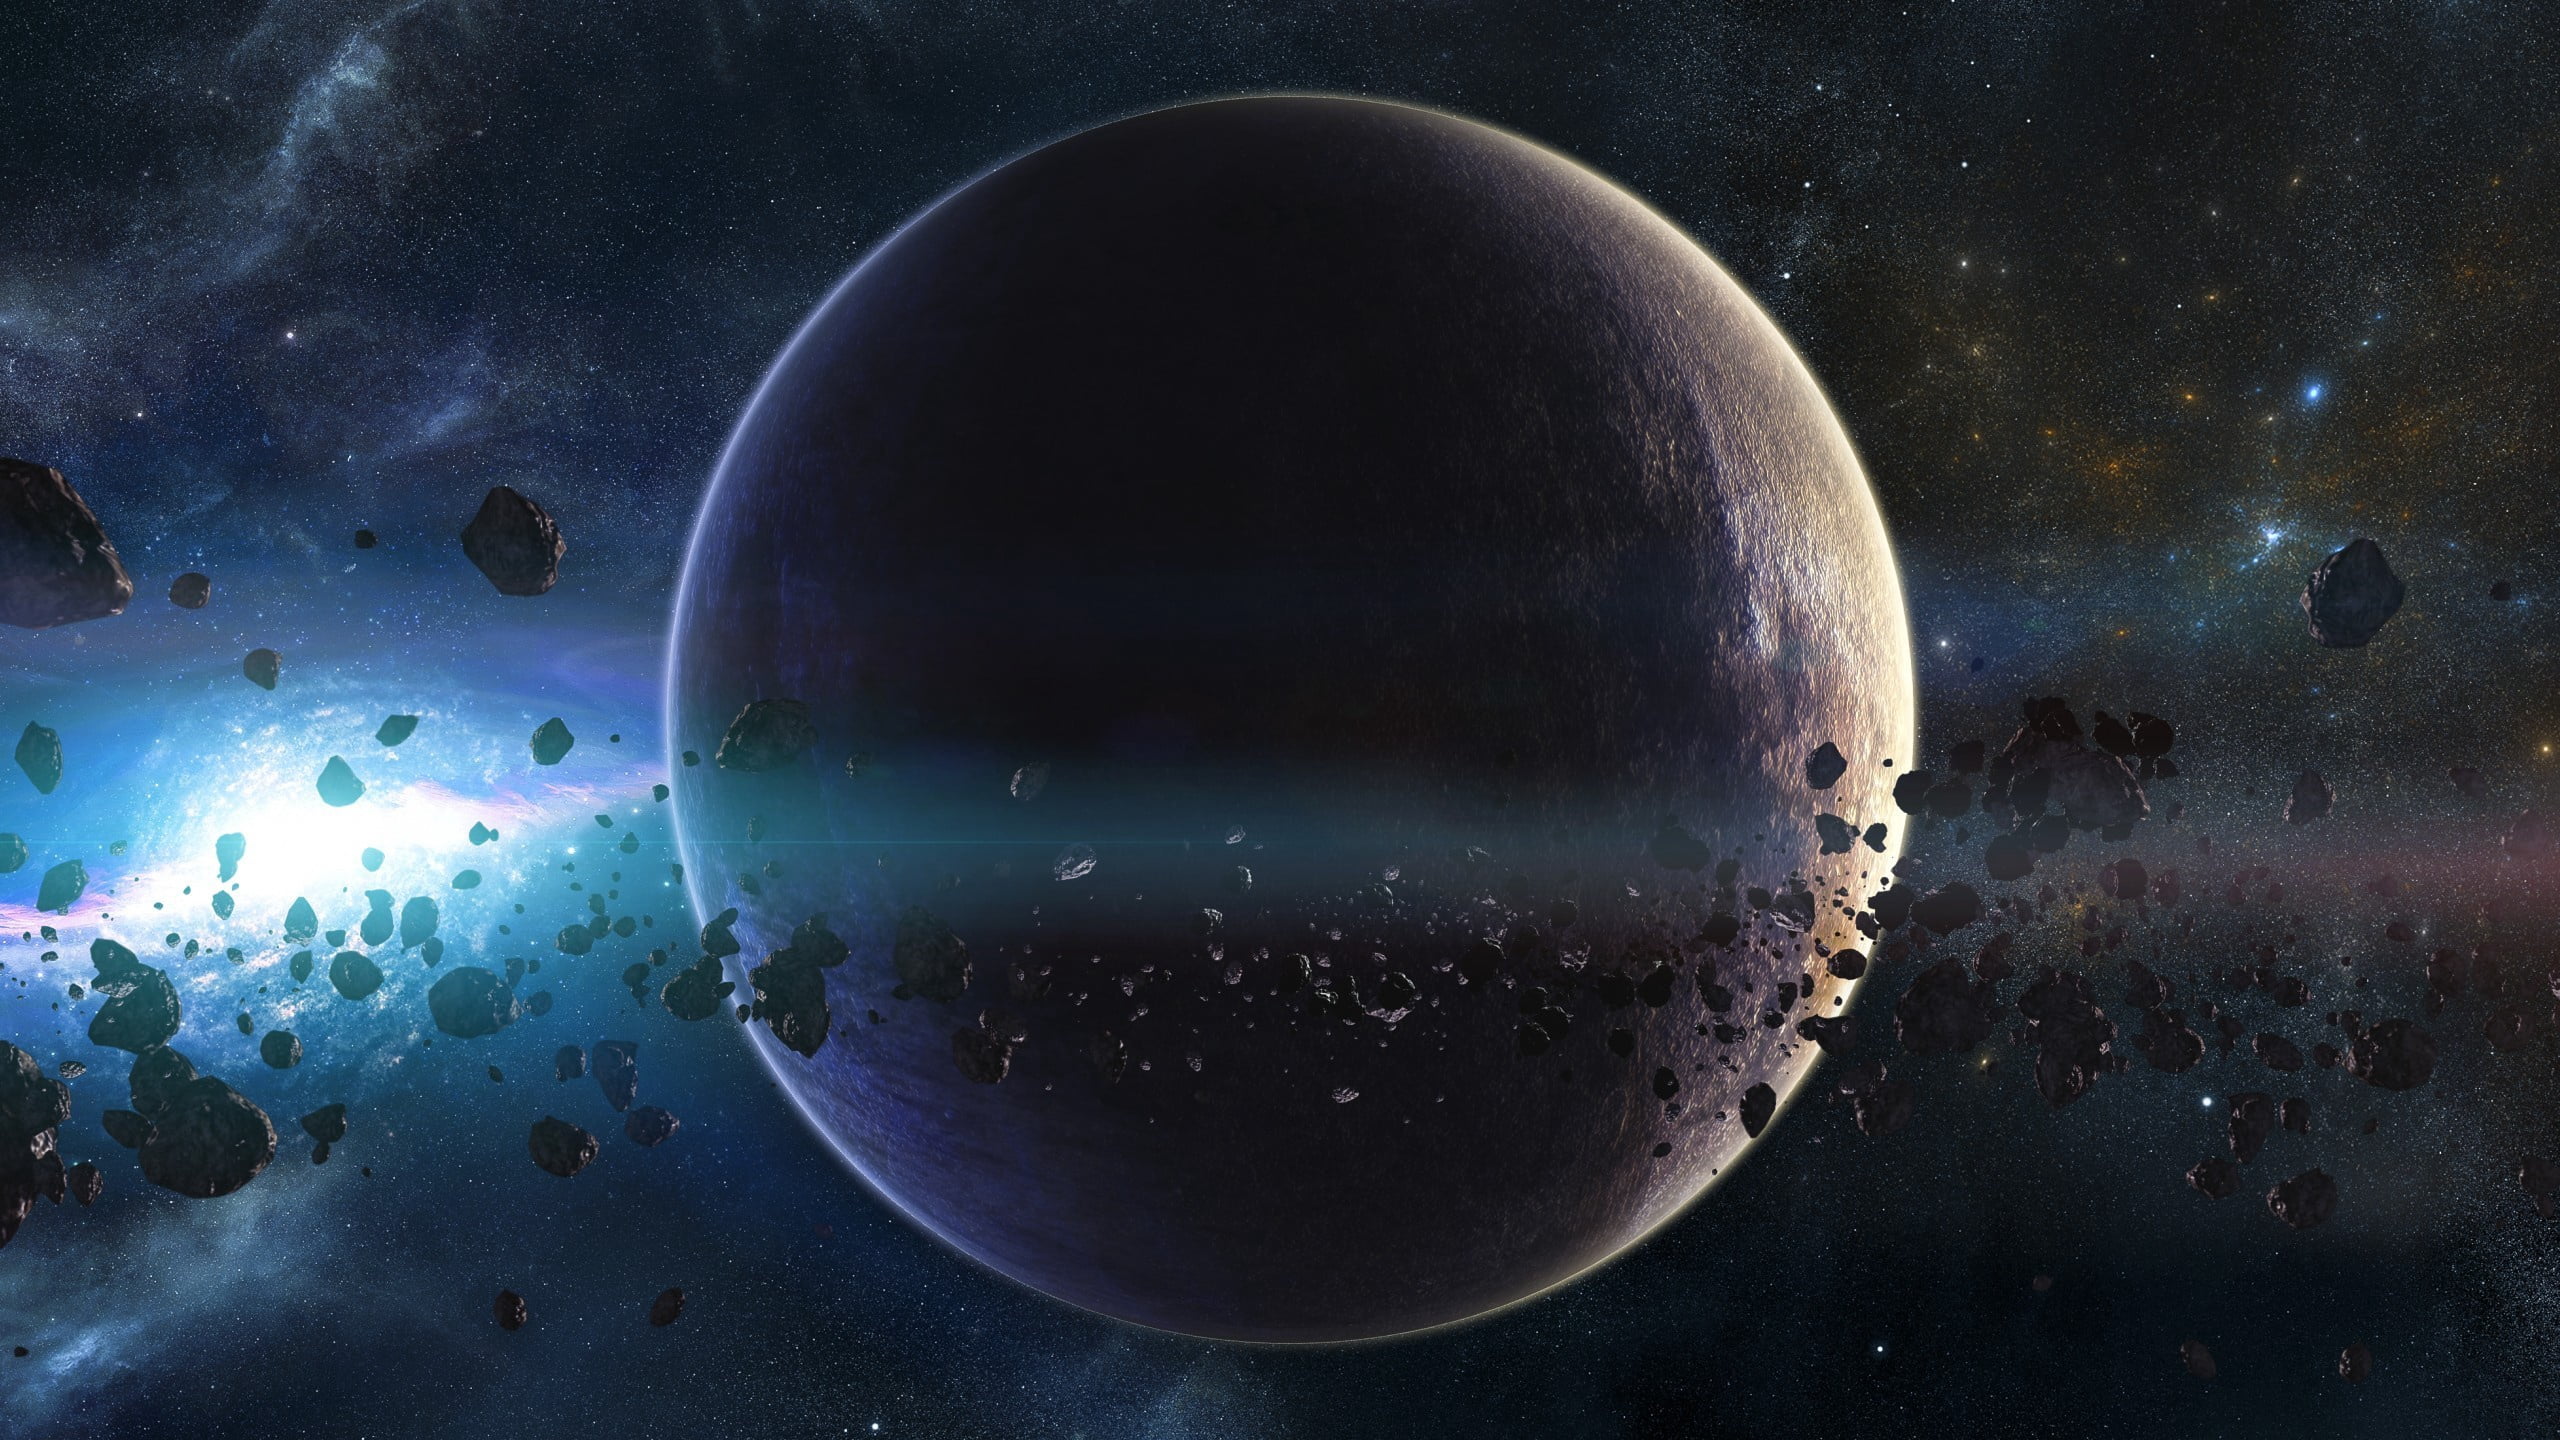 planet wallpaper, space, planets, asteroids, stars, belt, galaxy